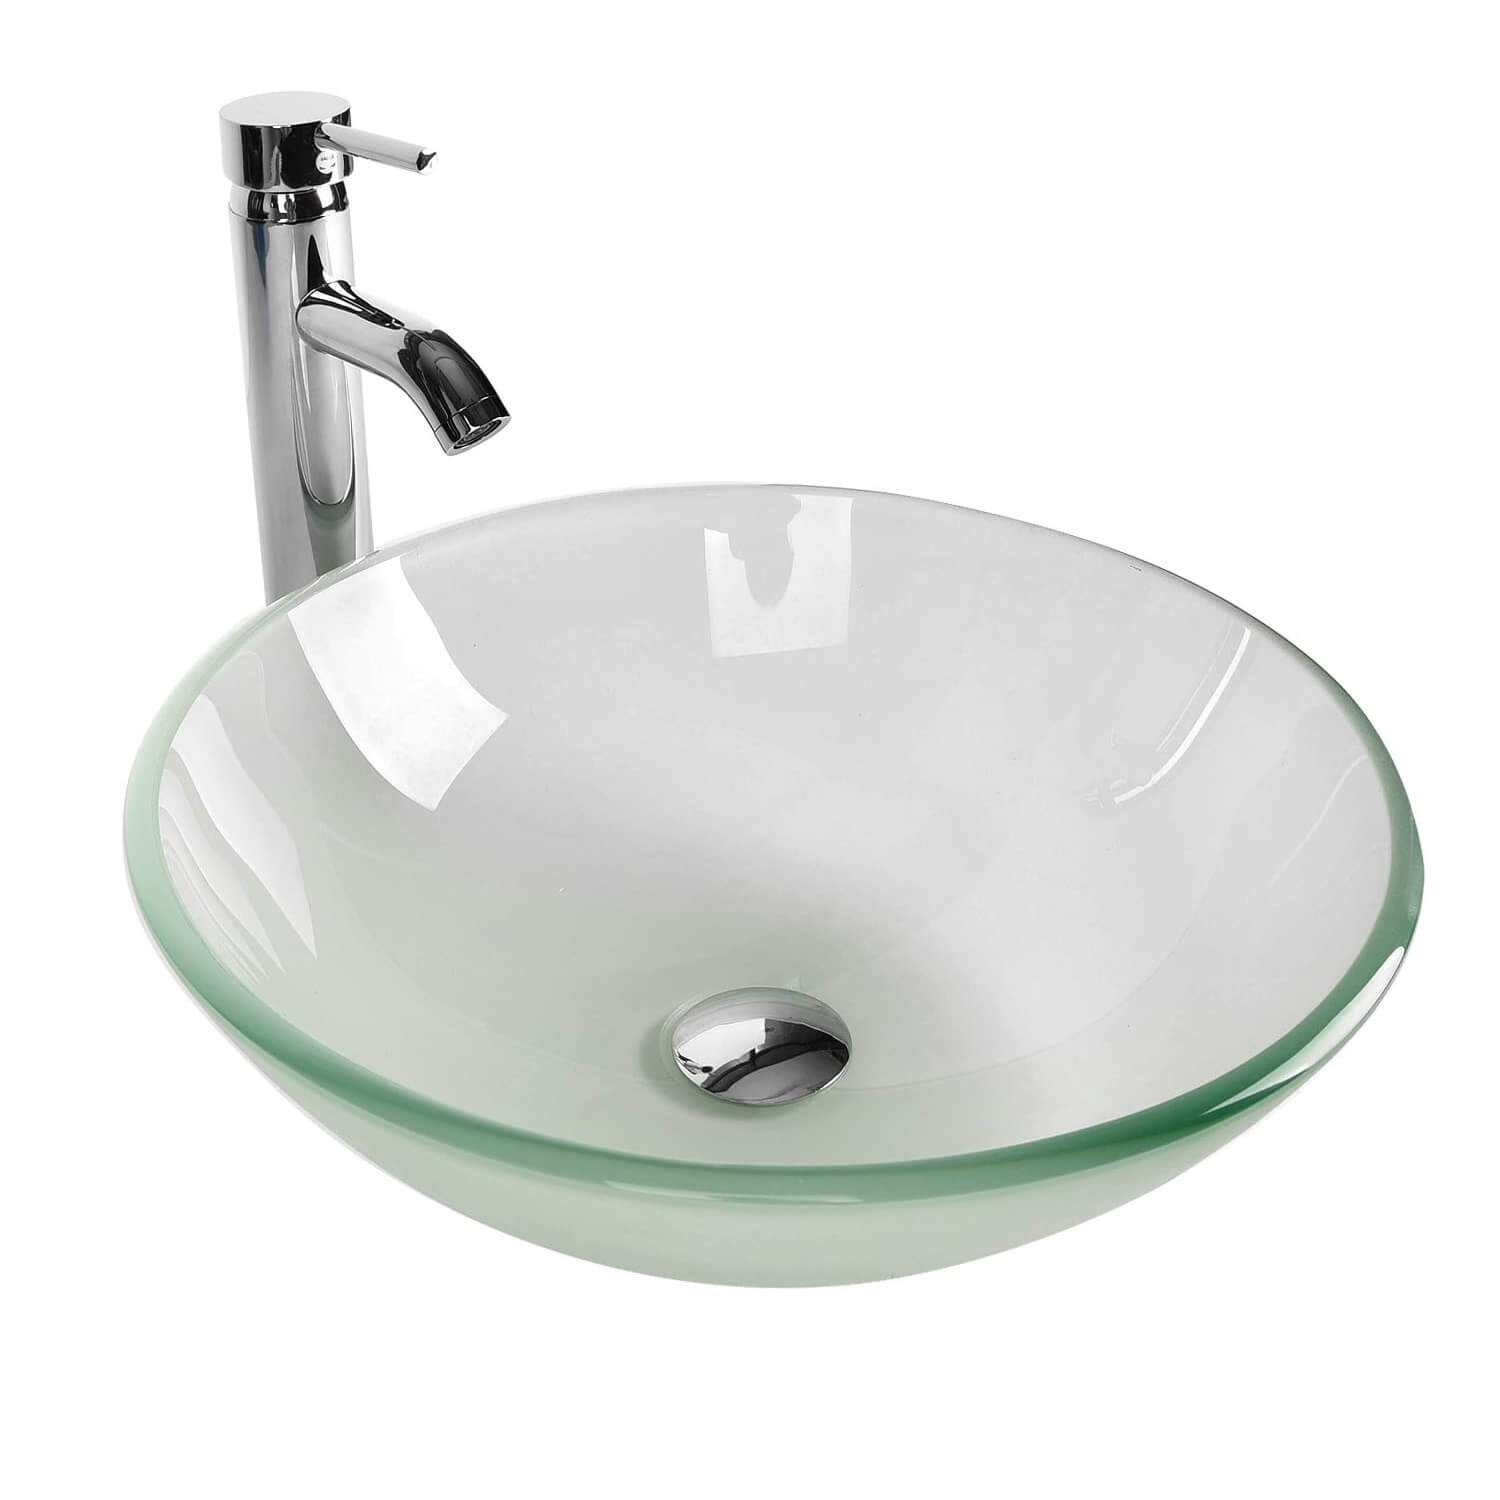 Elecwish round frosted sink BA20103